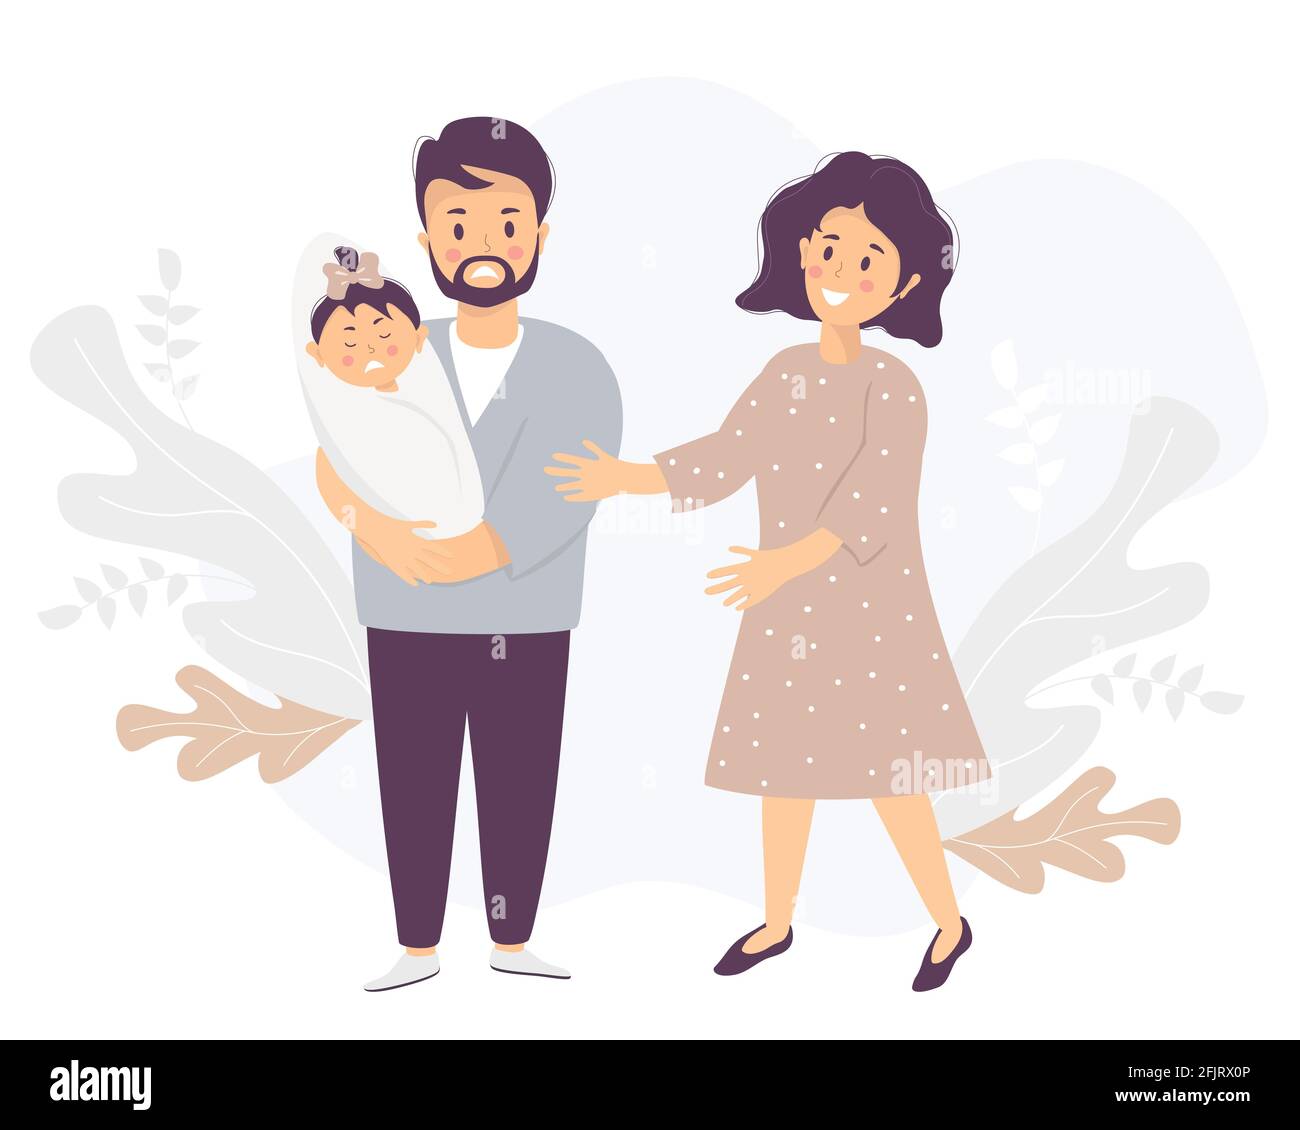 Family life and emotions concept. A sad man holds a crying baby in his arms. Nearby, a woman smiles and comforts. Vector illustration. Family with Stock Vector